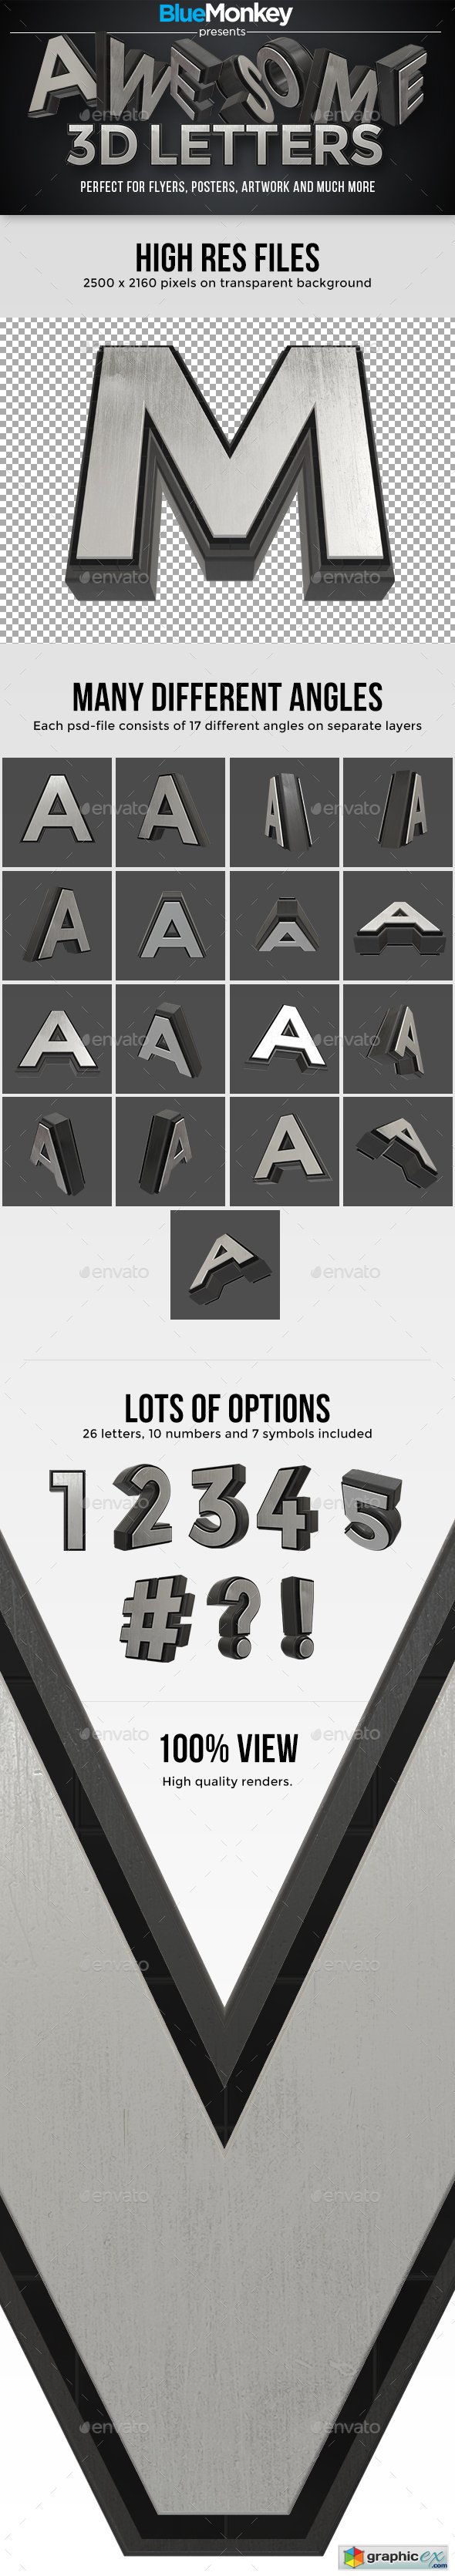 Awesome 3D letters